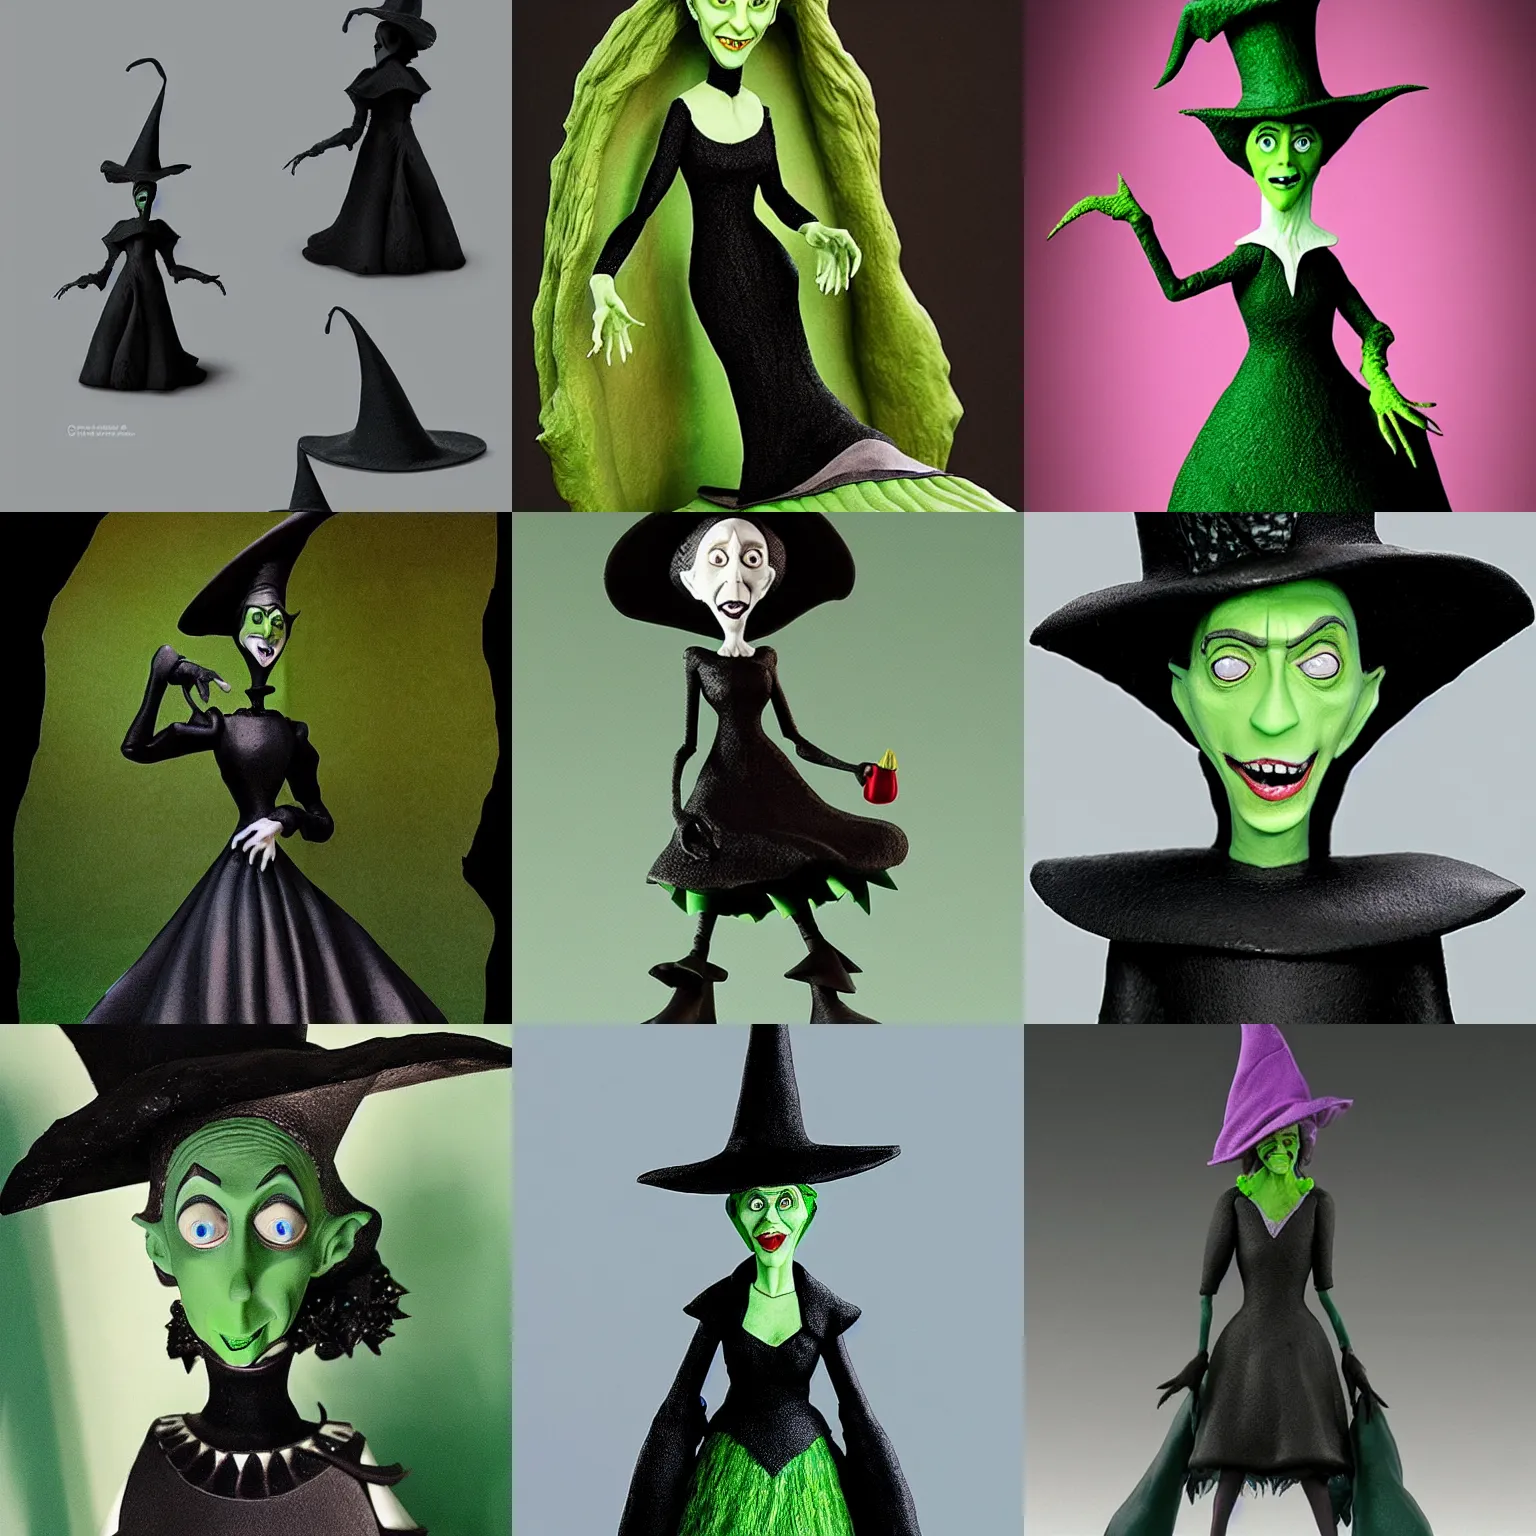 Prompt: A Tim Burton style claymation figurine of Wicked Witch from the movie “the Wizard of Oz“, Green skin, black dress, black pointed hat, concept art, stone castle interior